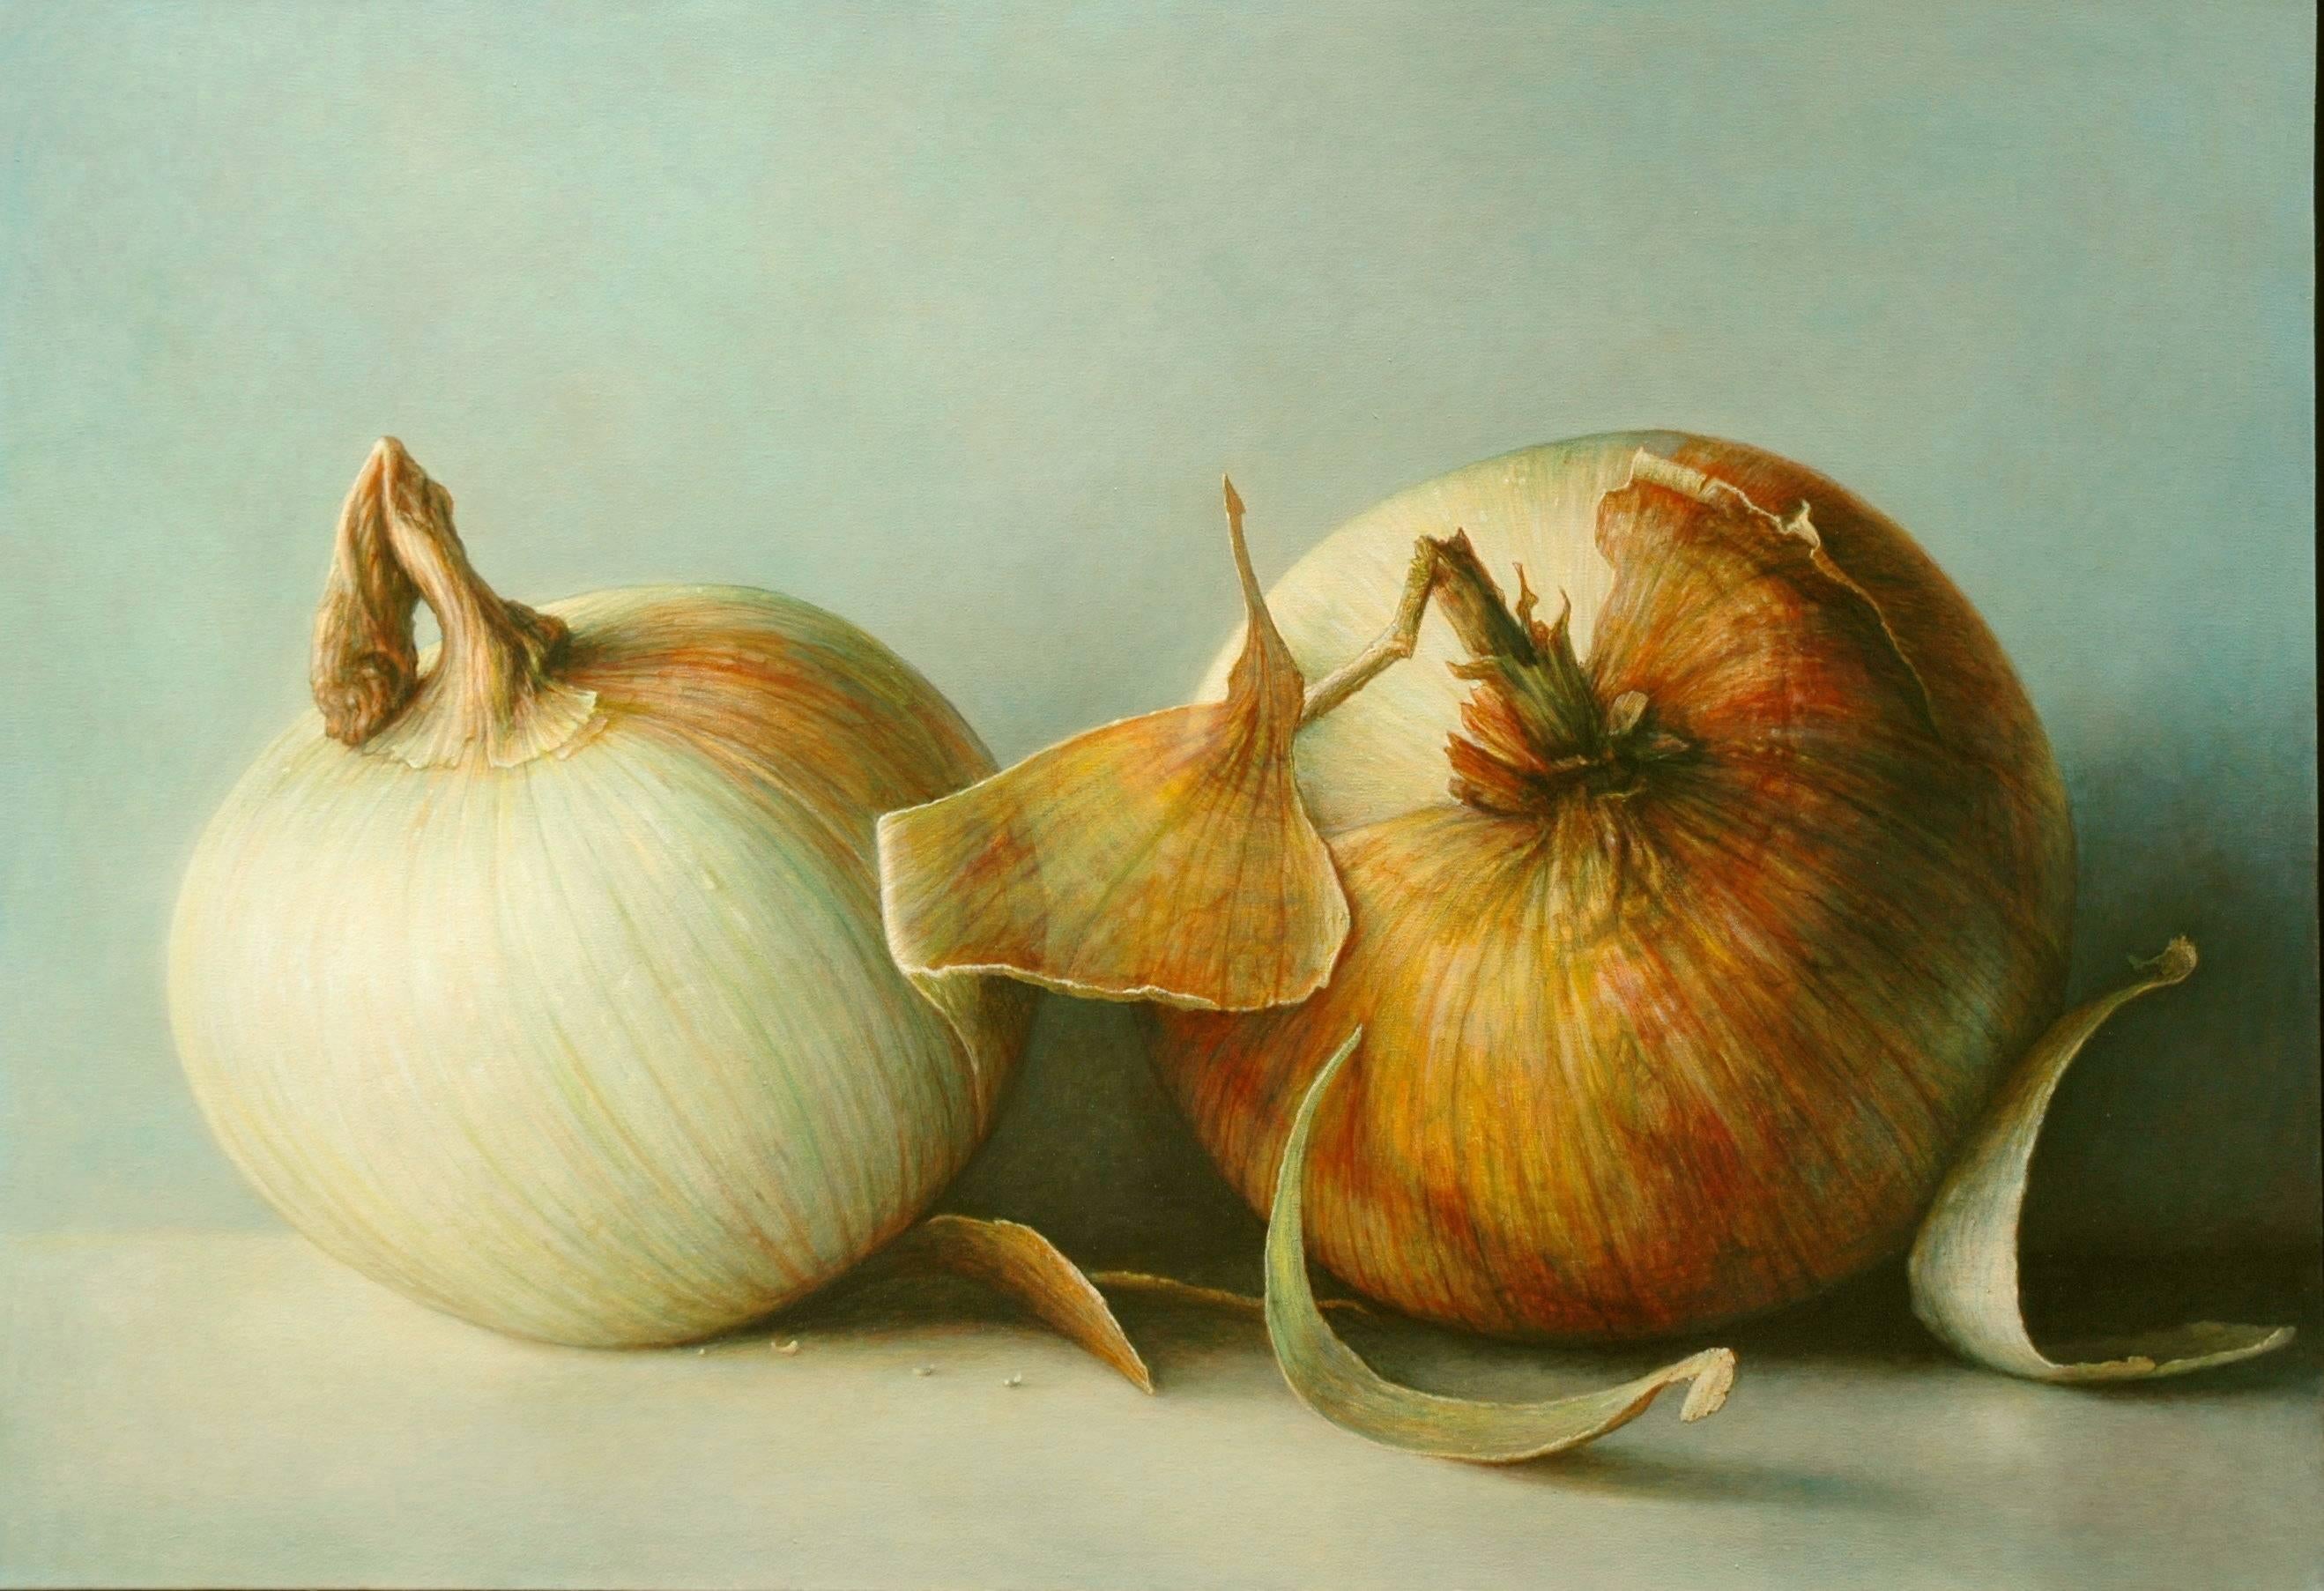 James Del Grosso Still-Life Painting - "Mulford Onions"  Large Highly Realistic Still Life, 2 Onions, Gray/Green Ground